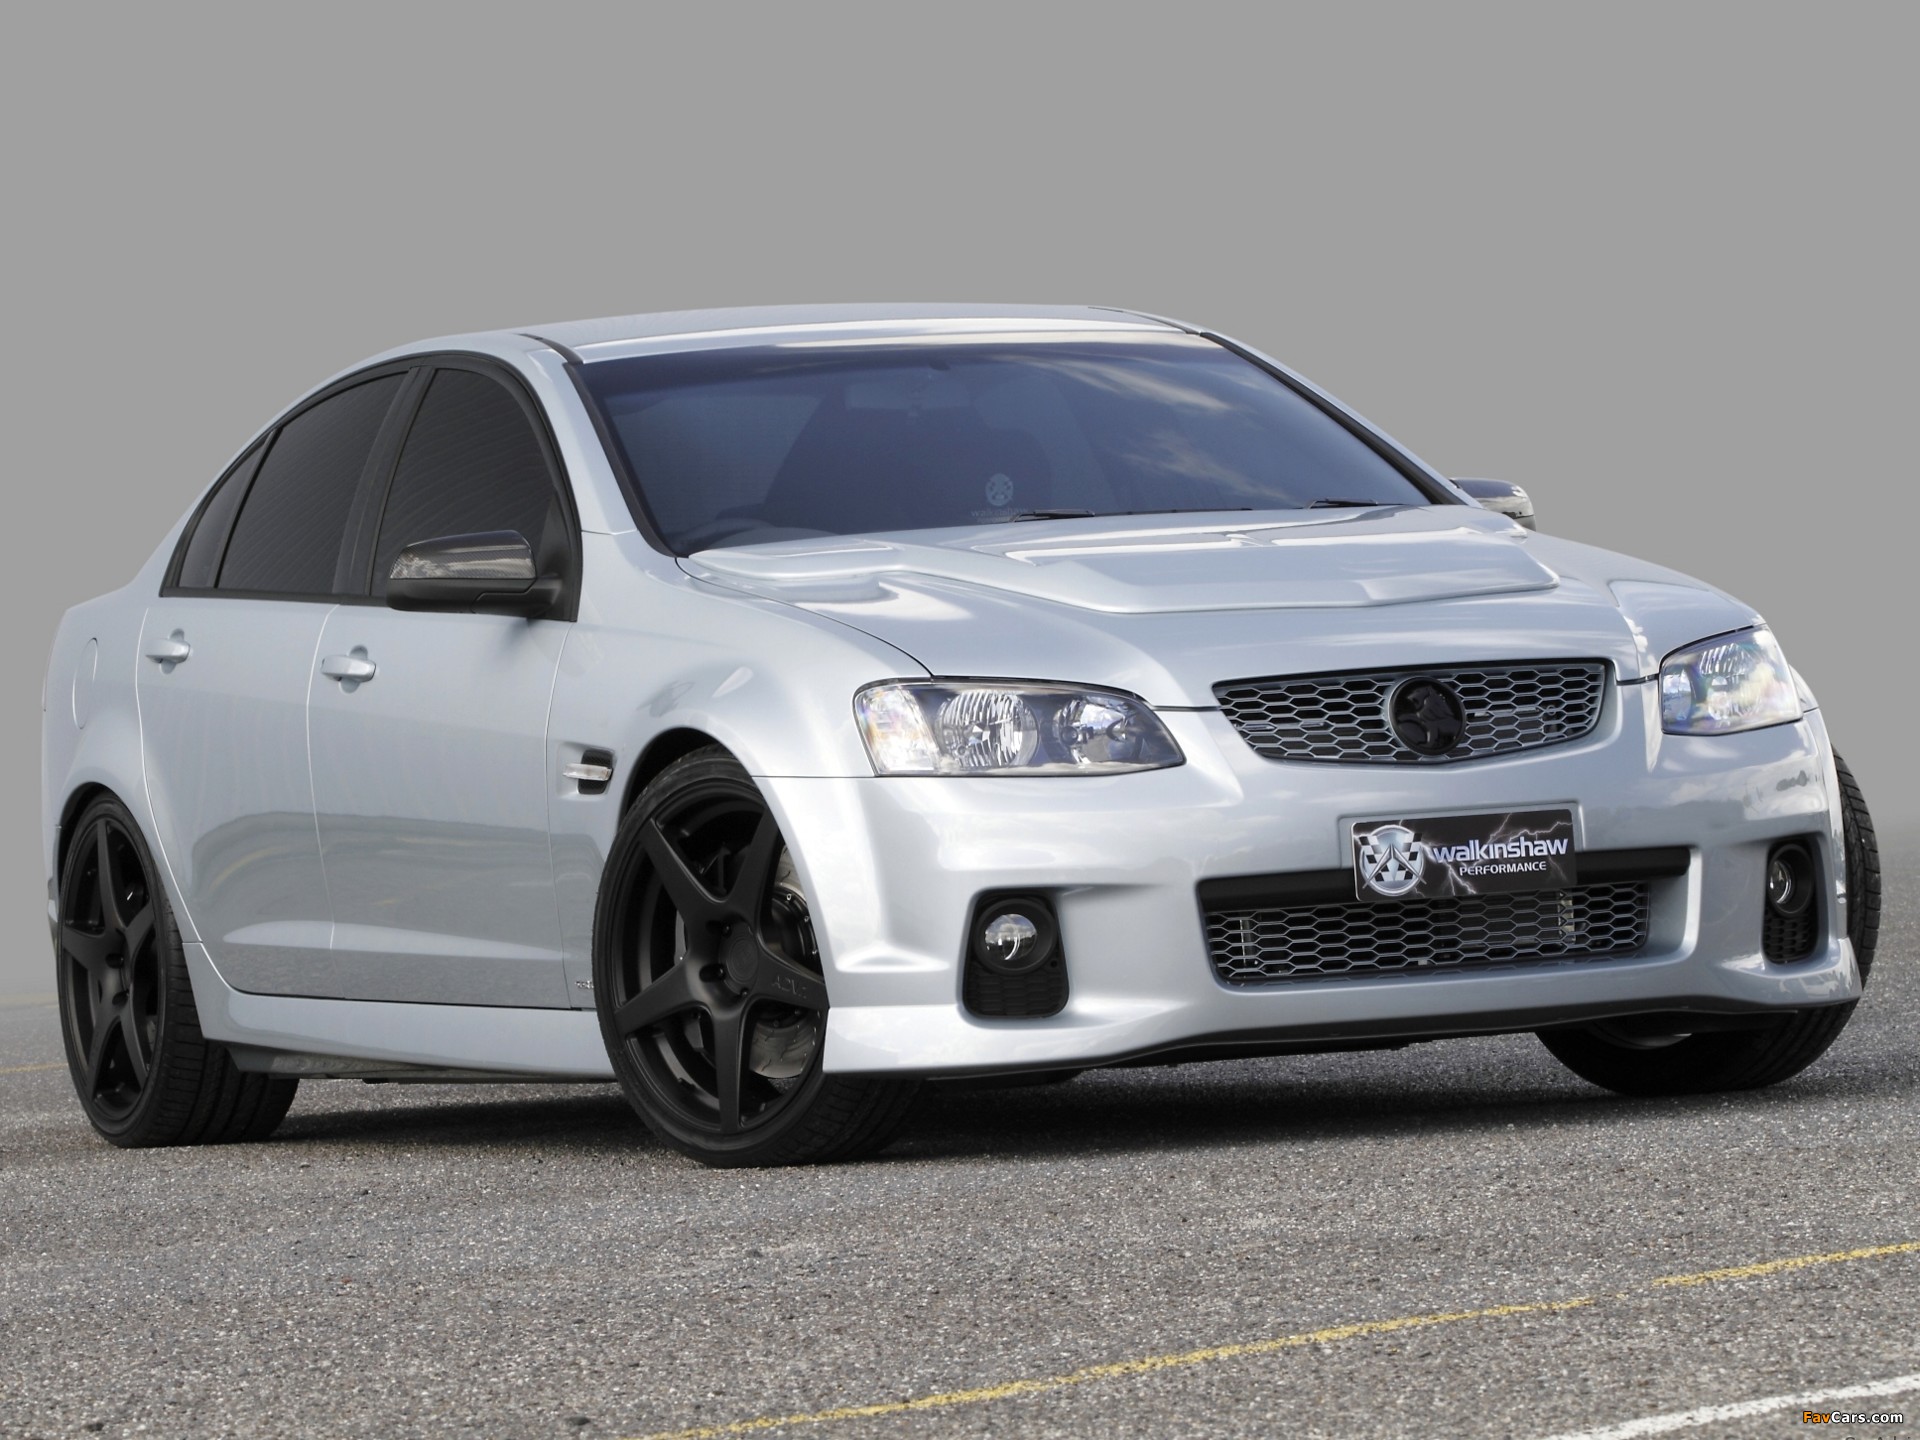 Walkinshaw Performance Holden Commodore SS (VE) 2010 wallpapers (1920 x 1440)